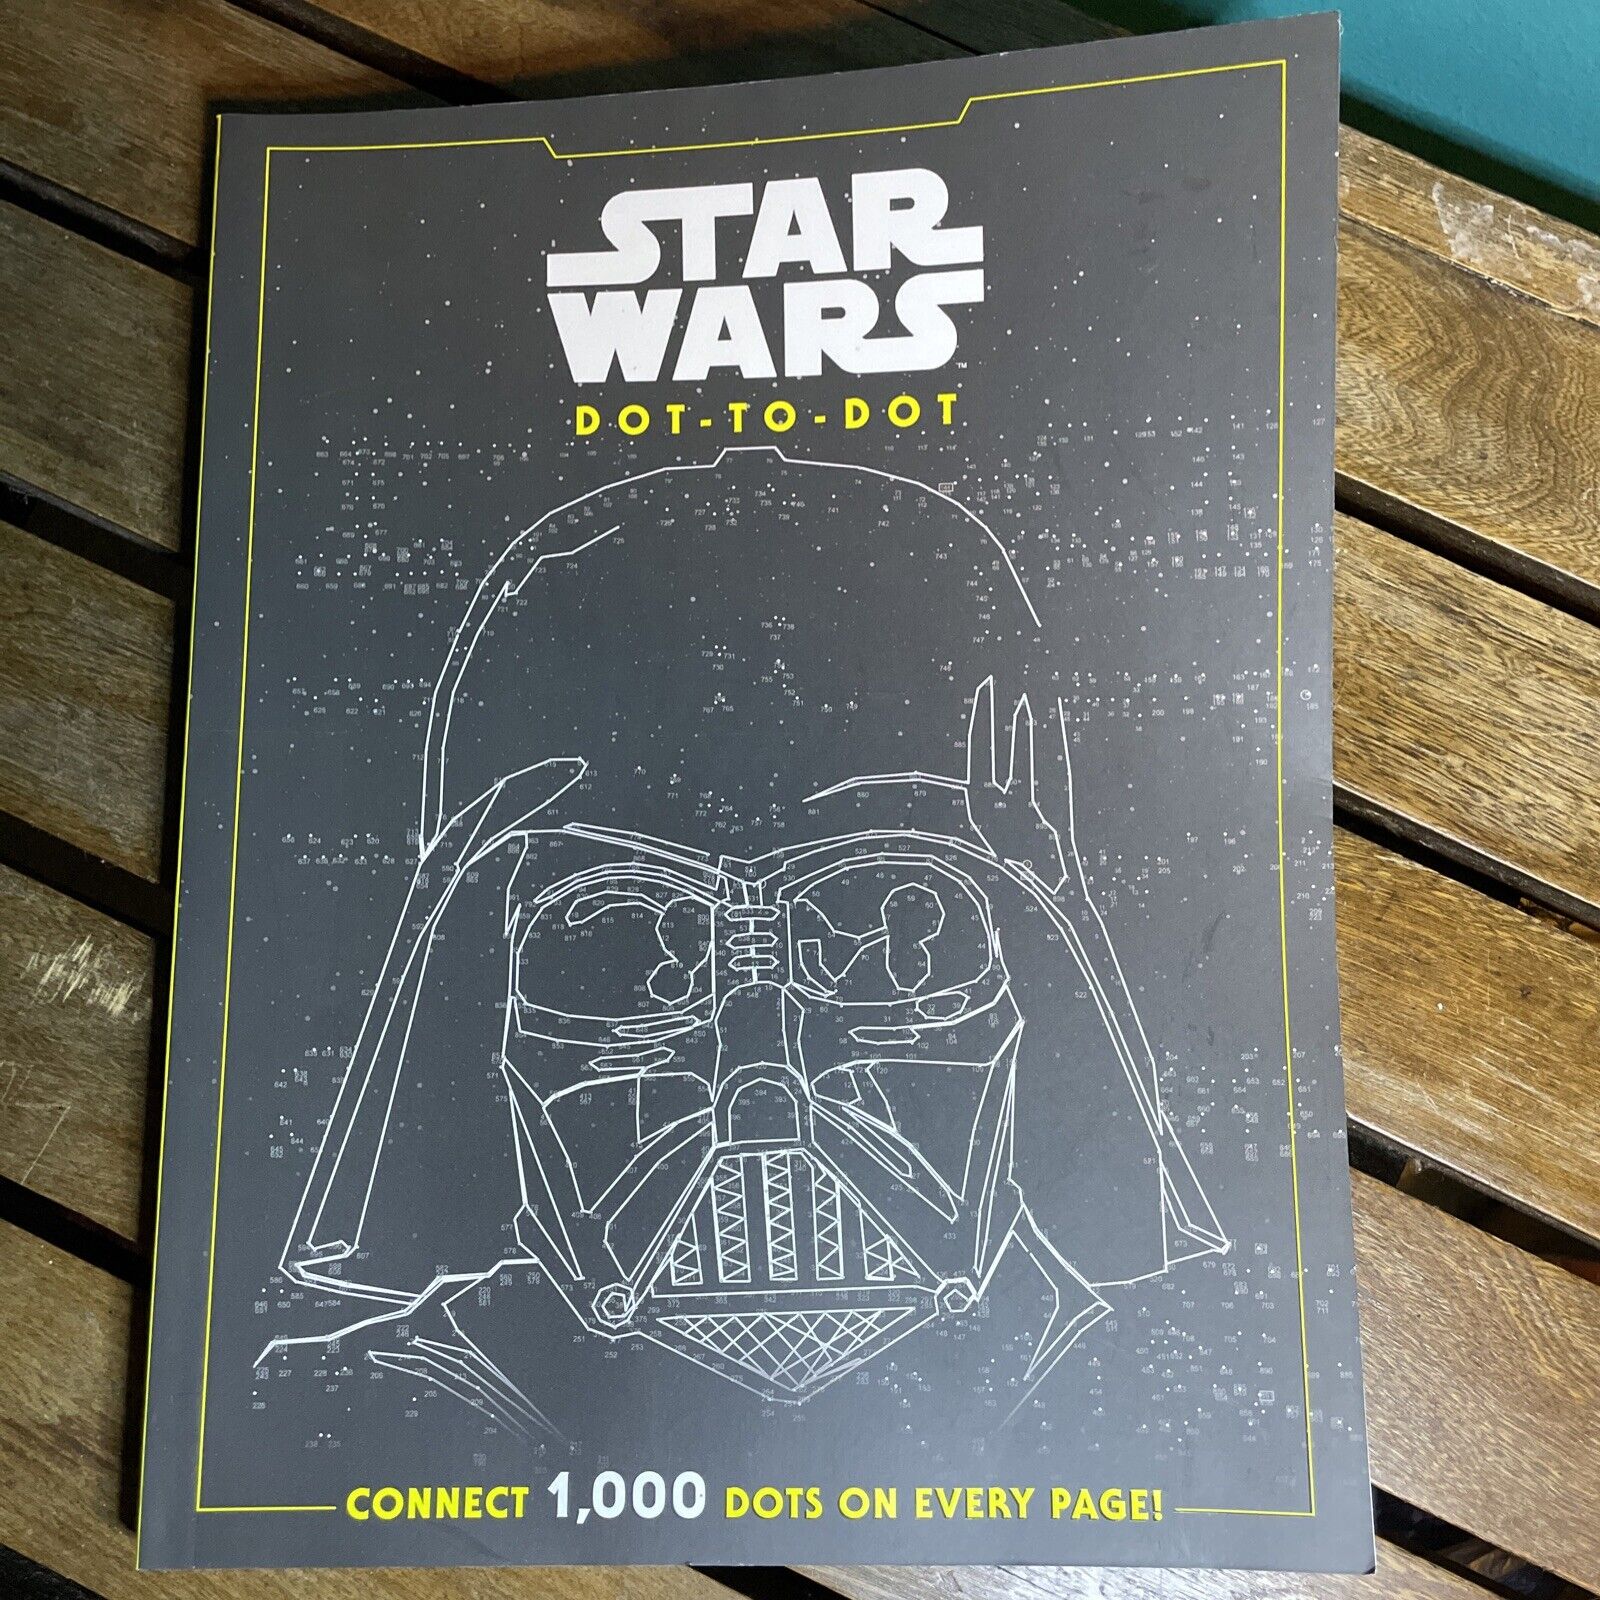 Star Wars Dot To Dot Puzzle Book Over 100 Plus Character And Scene Puzzles New